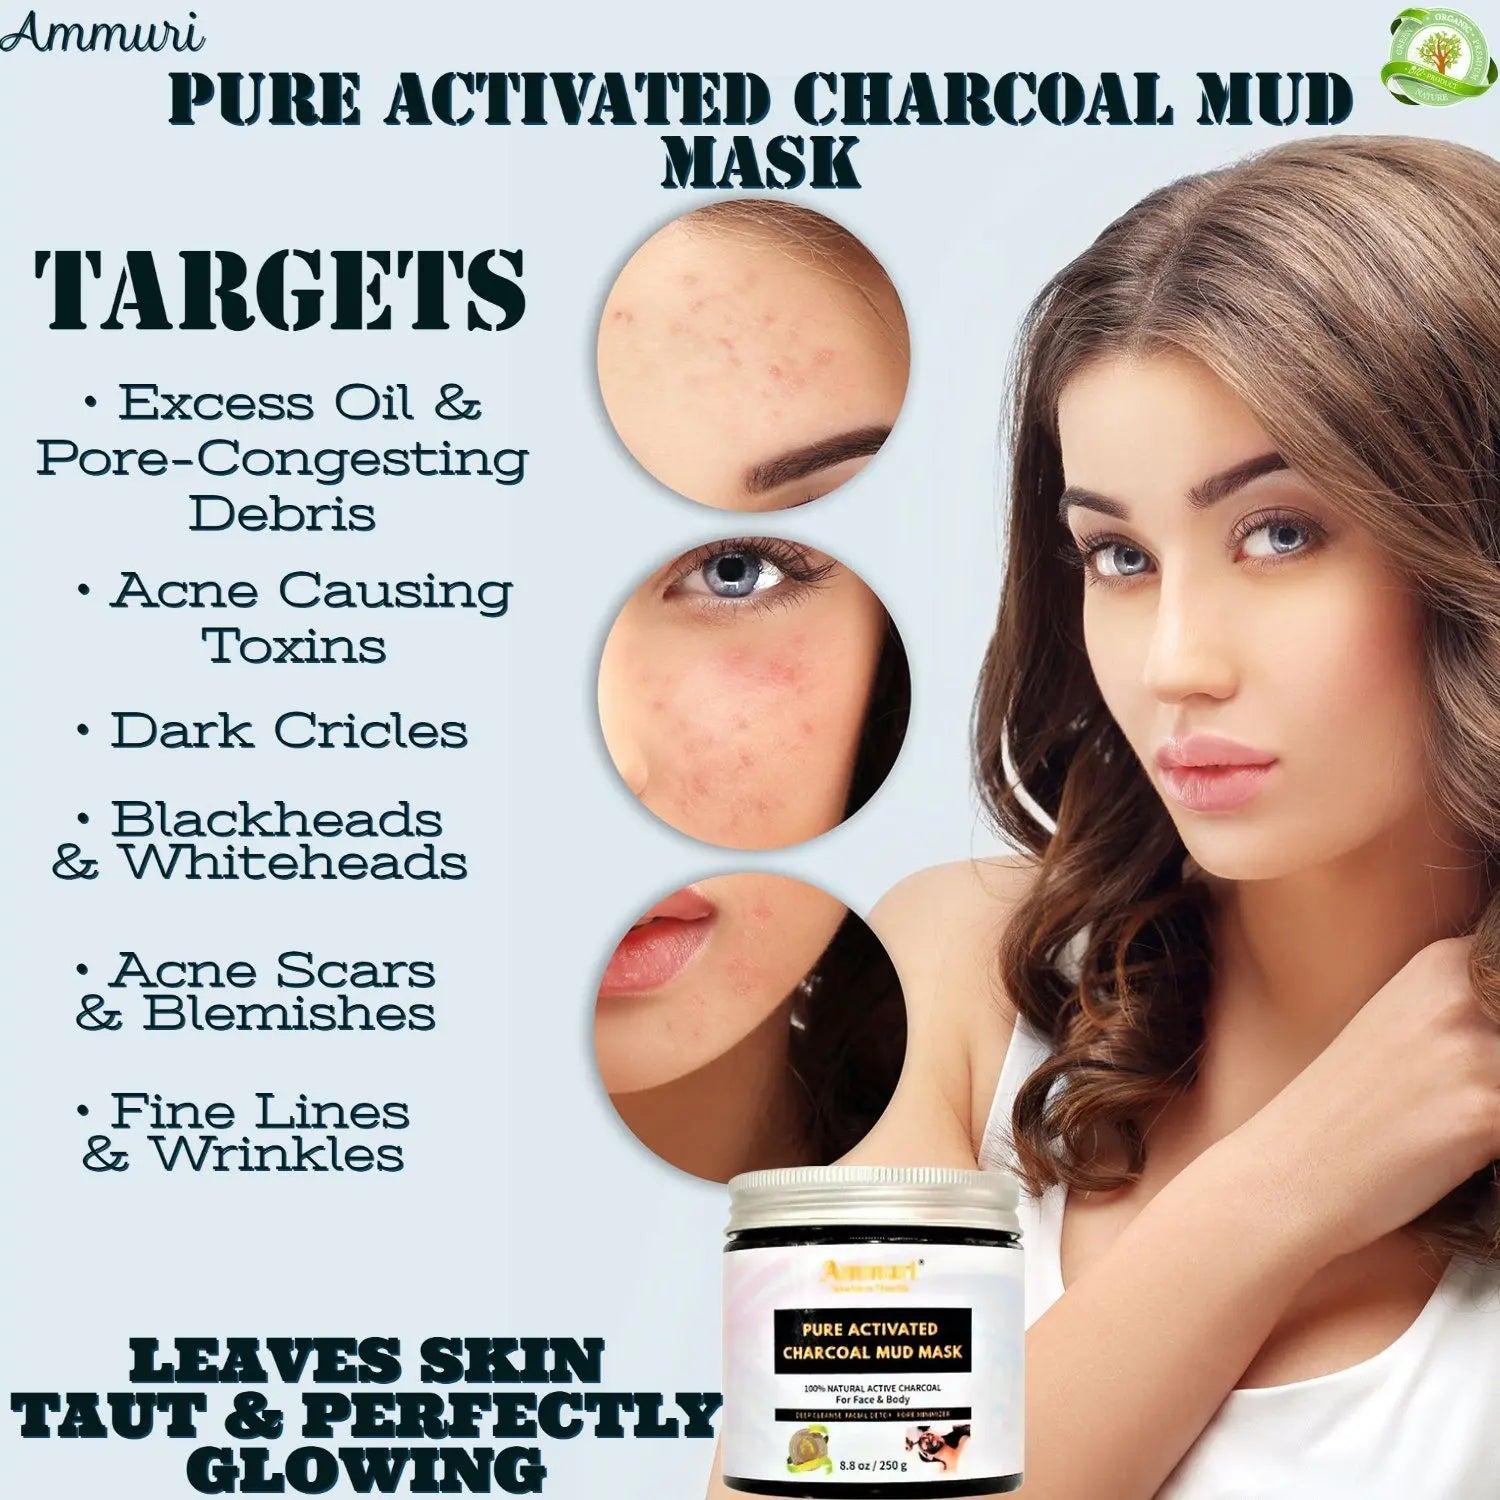 Pure Activated Charcoal Face & Body Mud Mask for Men & Women 250g Ammuri Skincare